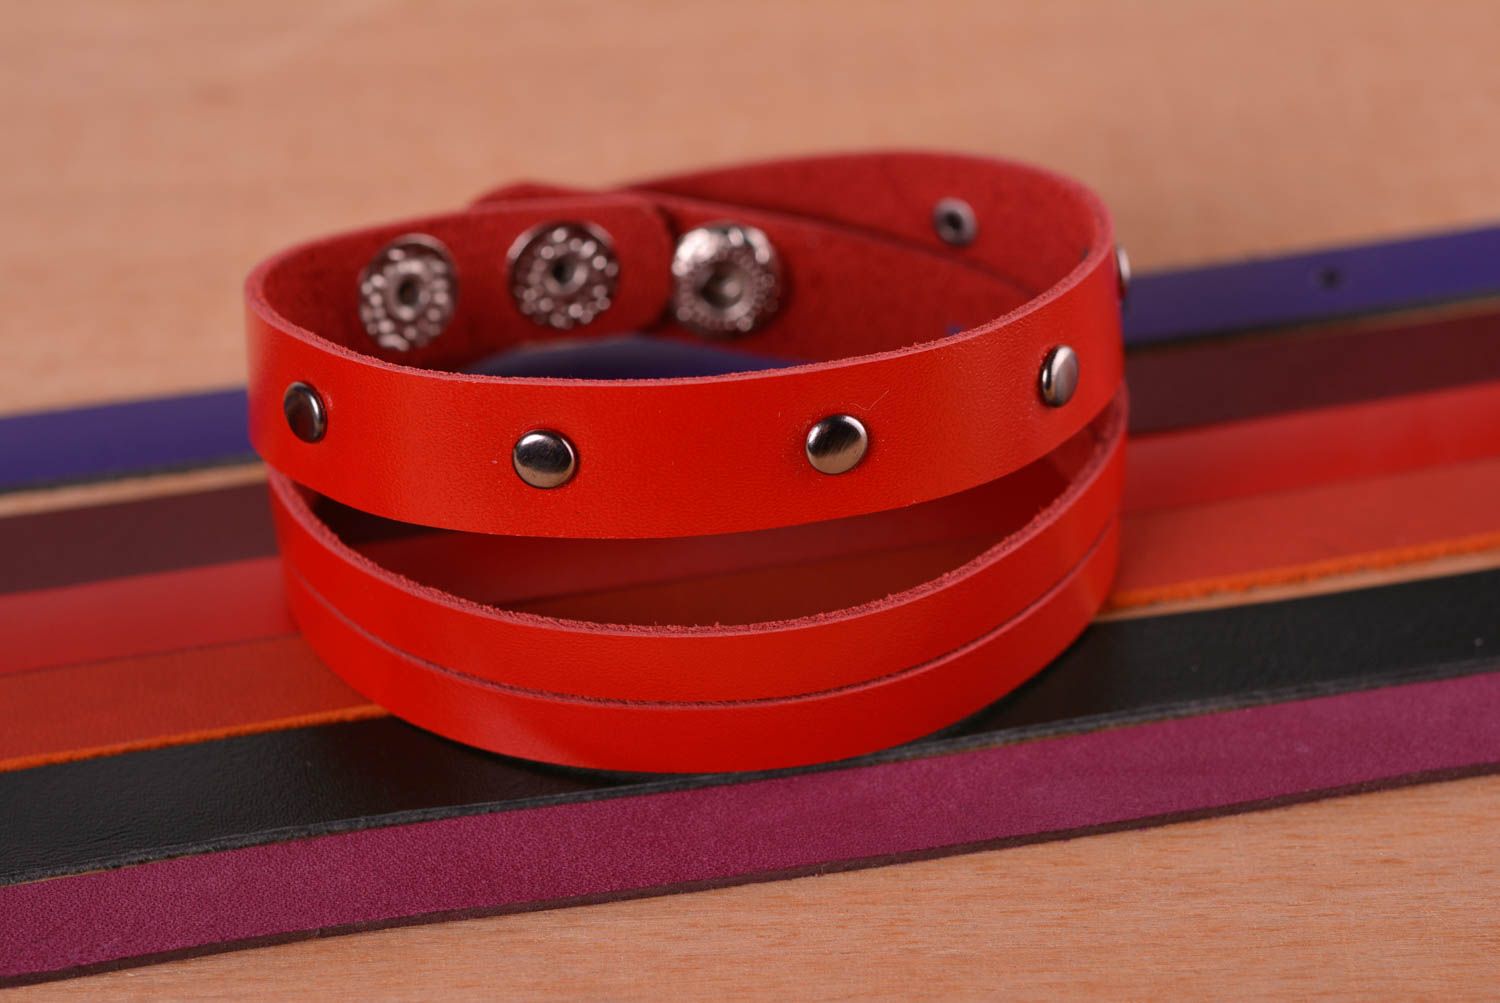 Stylish handmade leather bracelet costume jewelry designs gifts for her photo 1